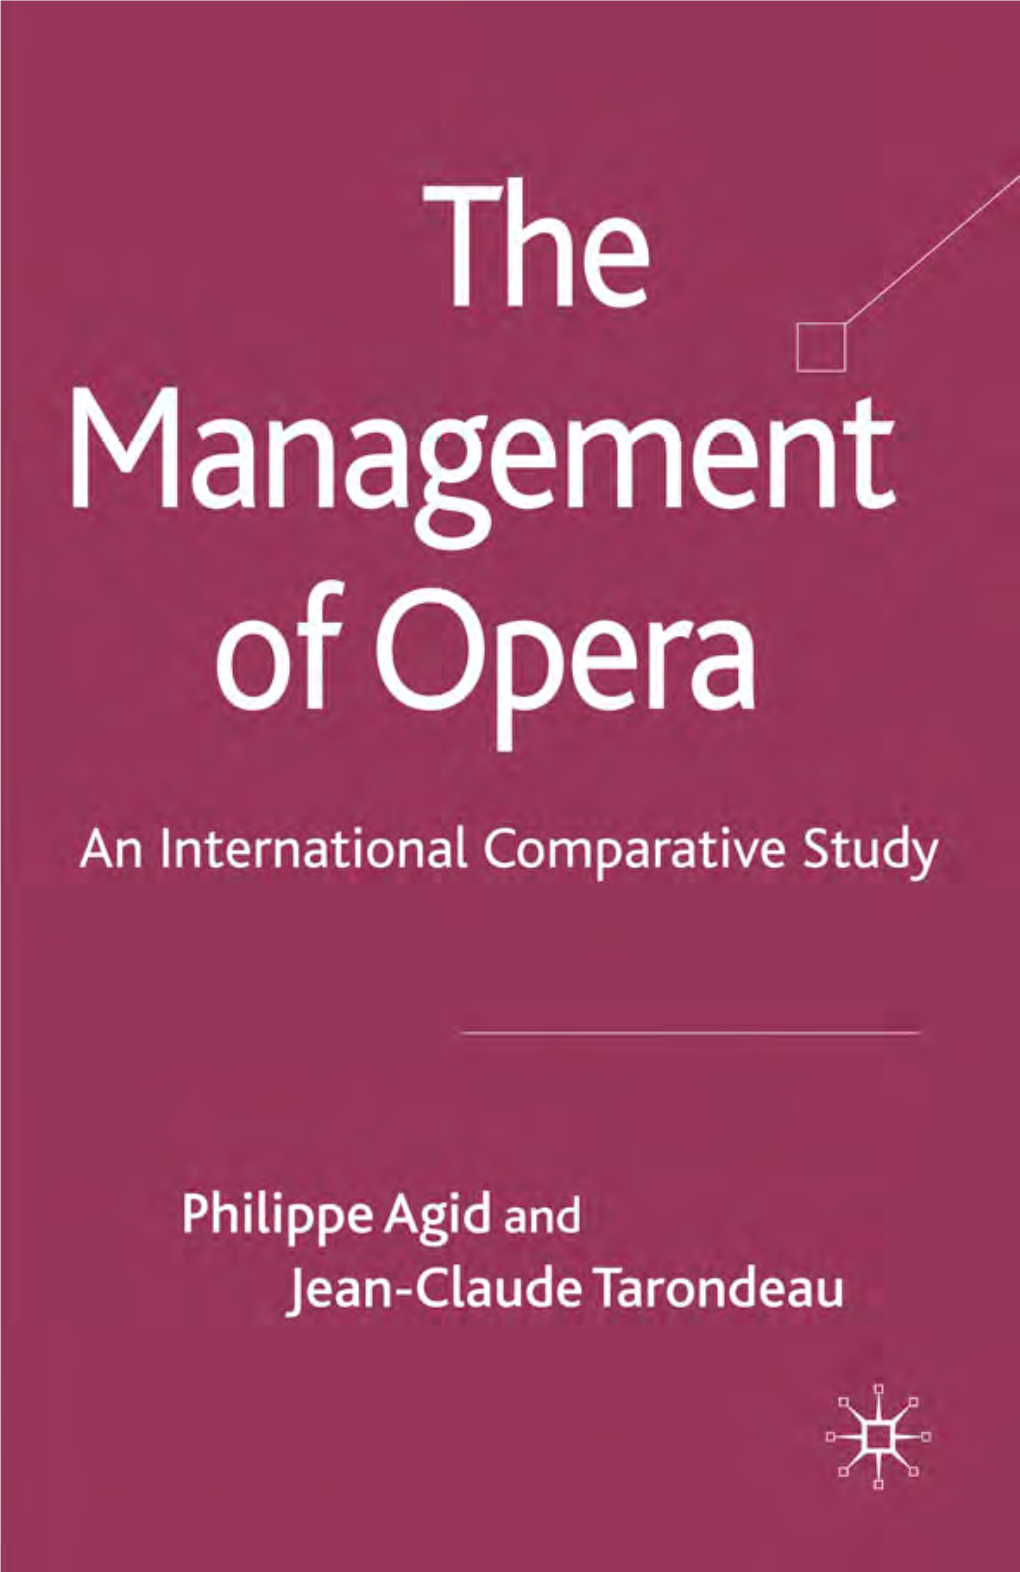 The Management of Opera: an International Comparative Study / Philippe Agid and Jean-Claude Tarondeau P